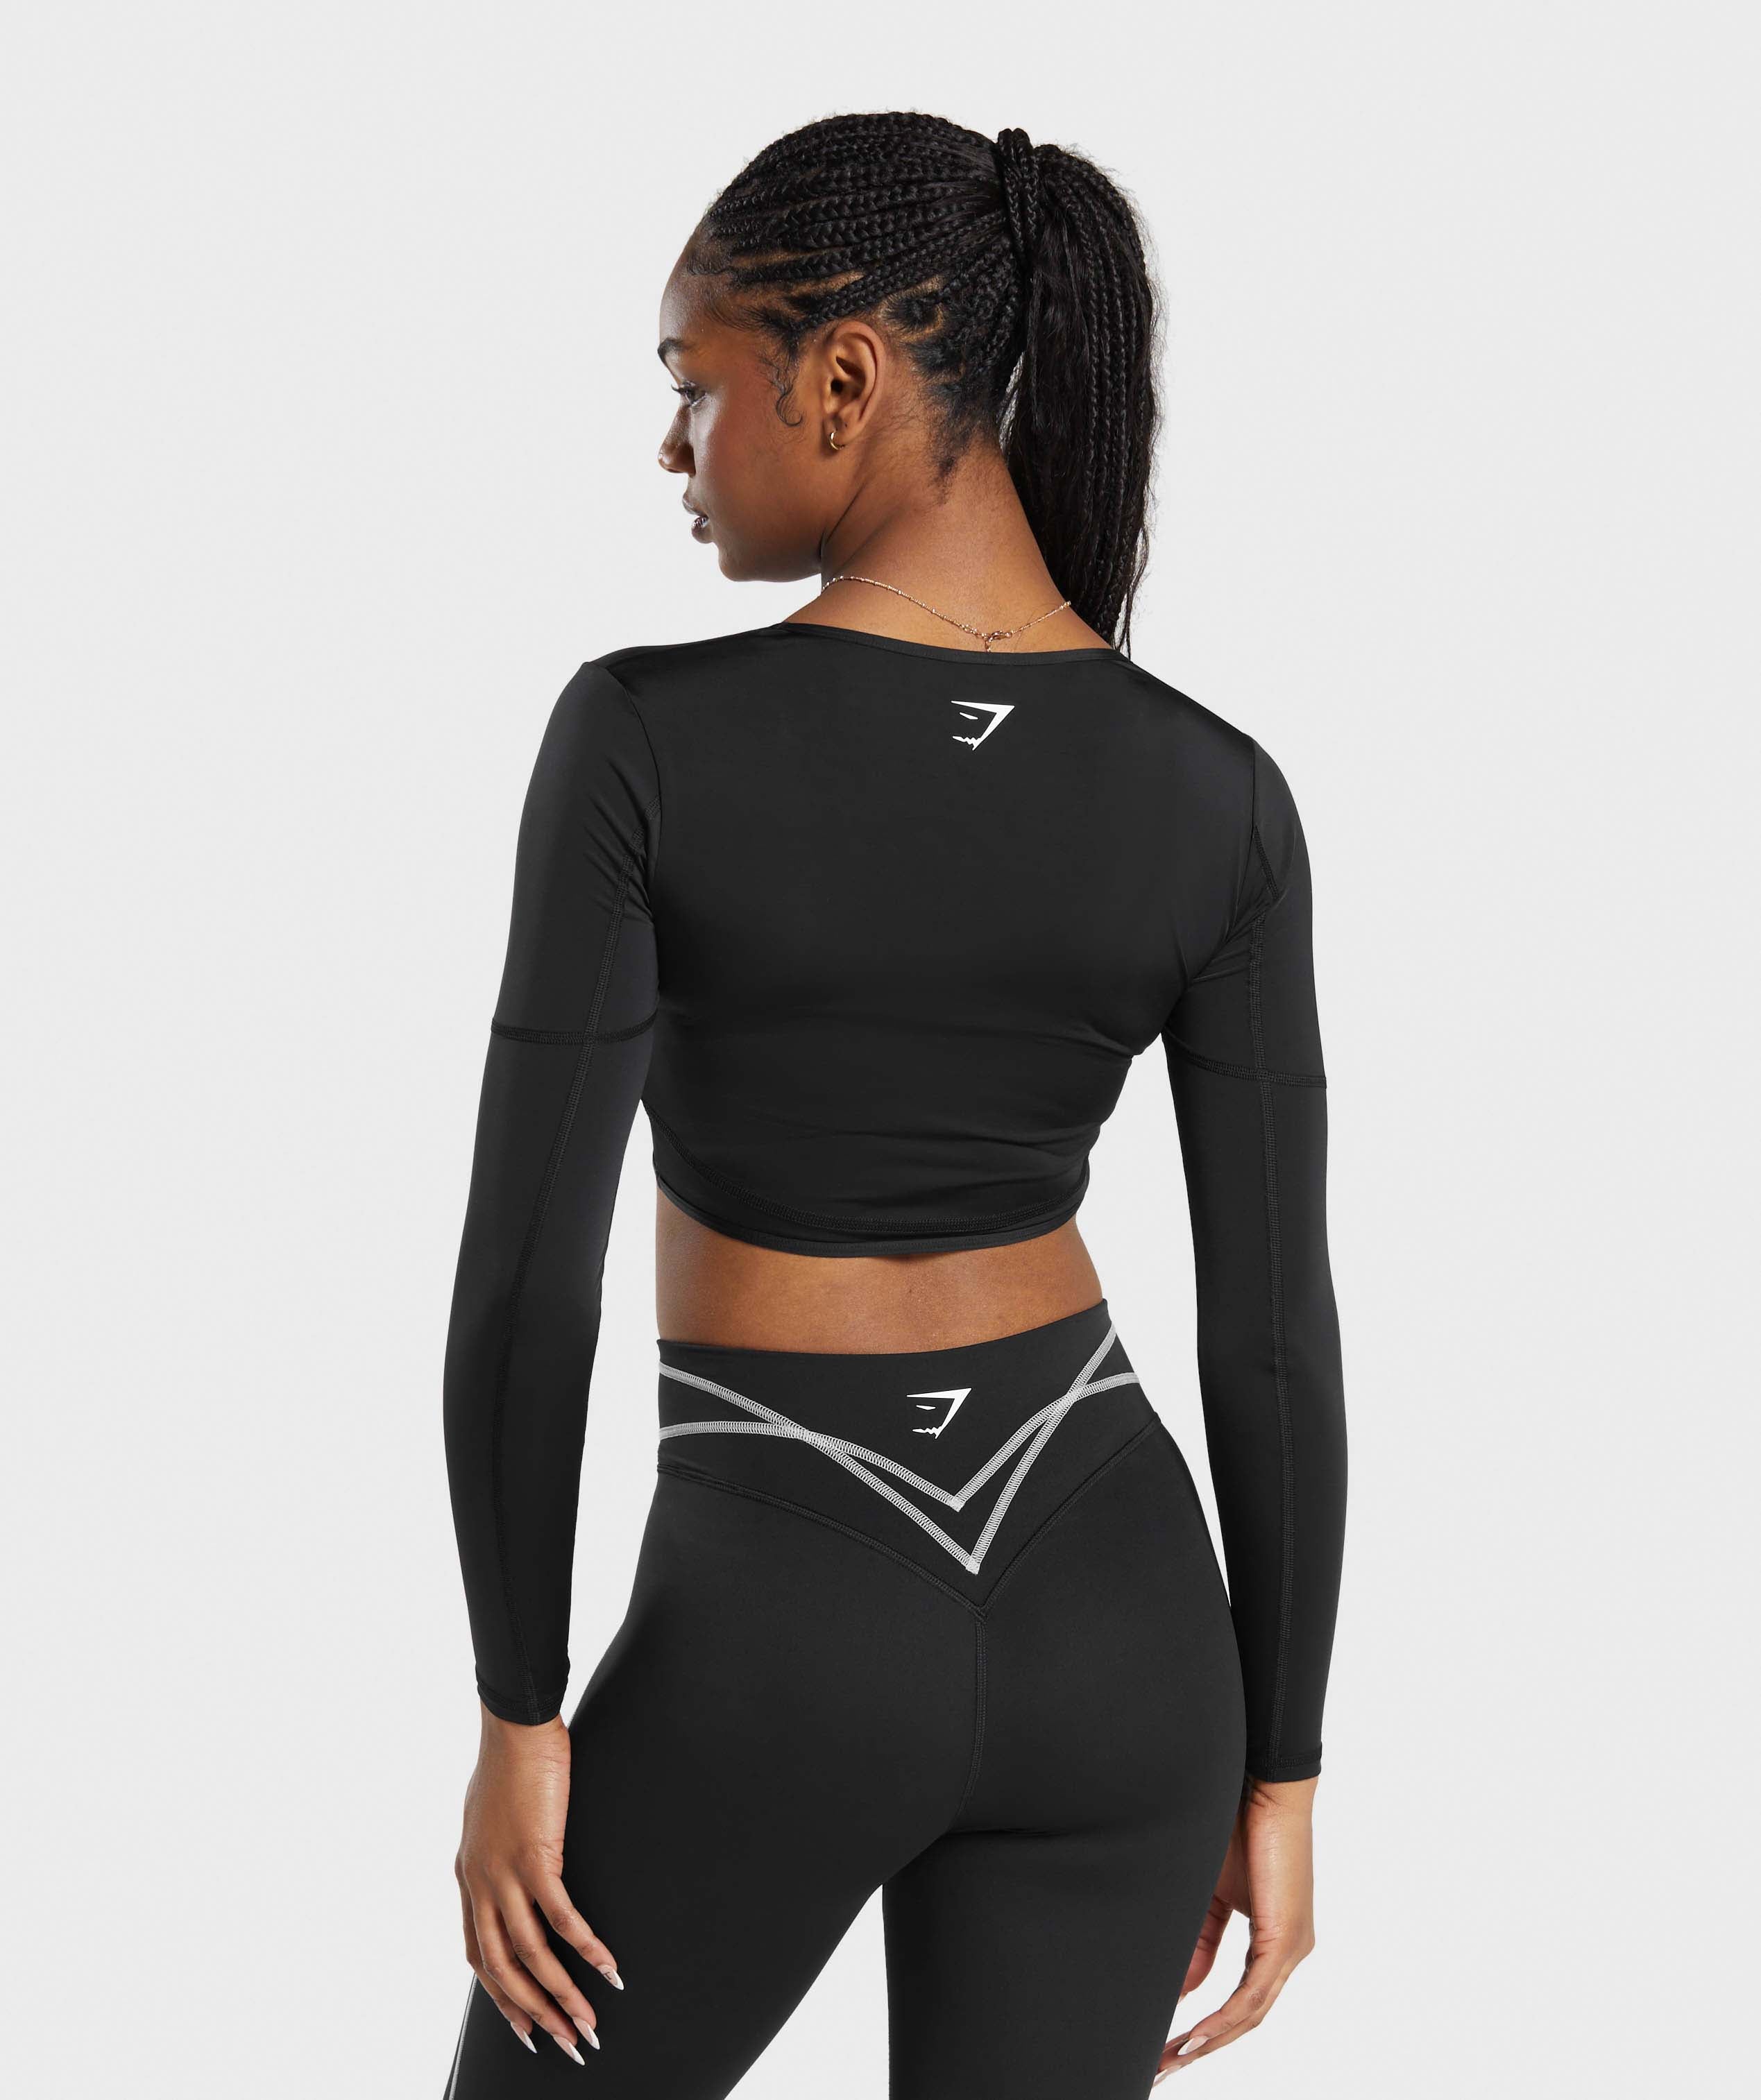 Stitch Feature Long Sleeve Crop Top in Black/Stock Black Marl - view 2